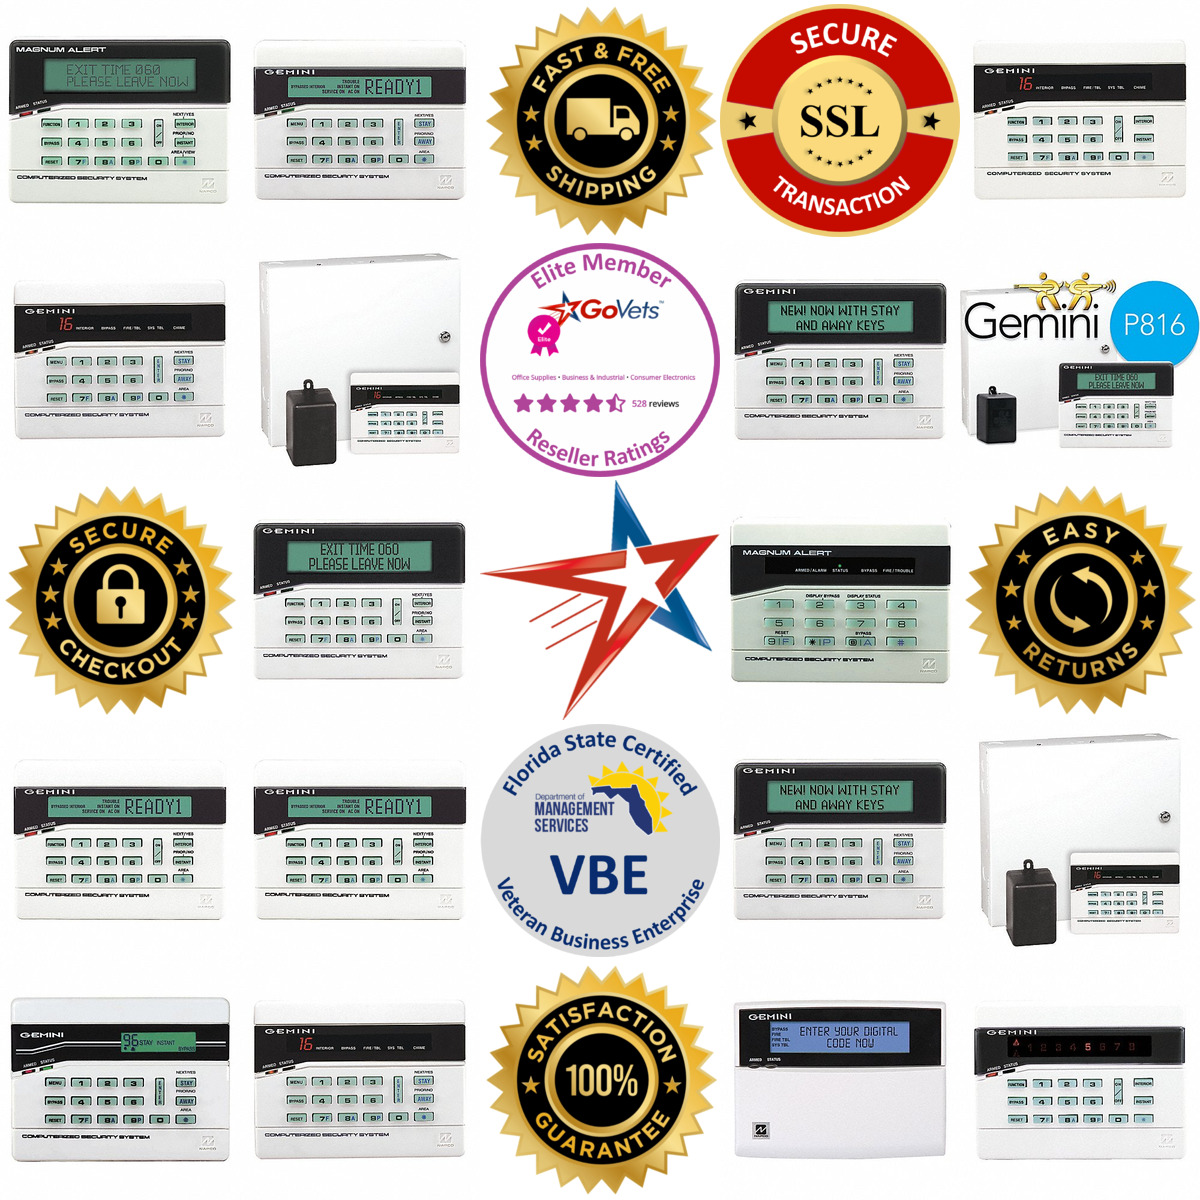 A selection of Intrusion System Keypads products on GoVets